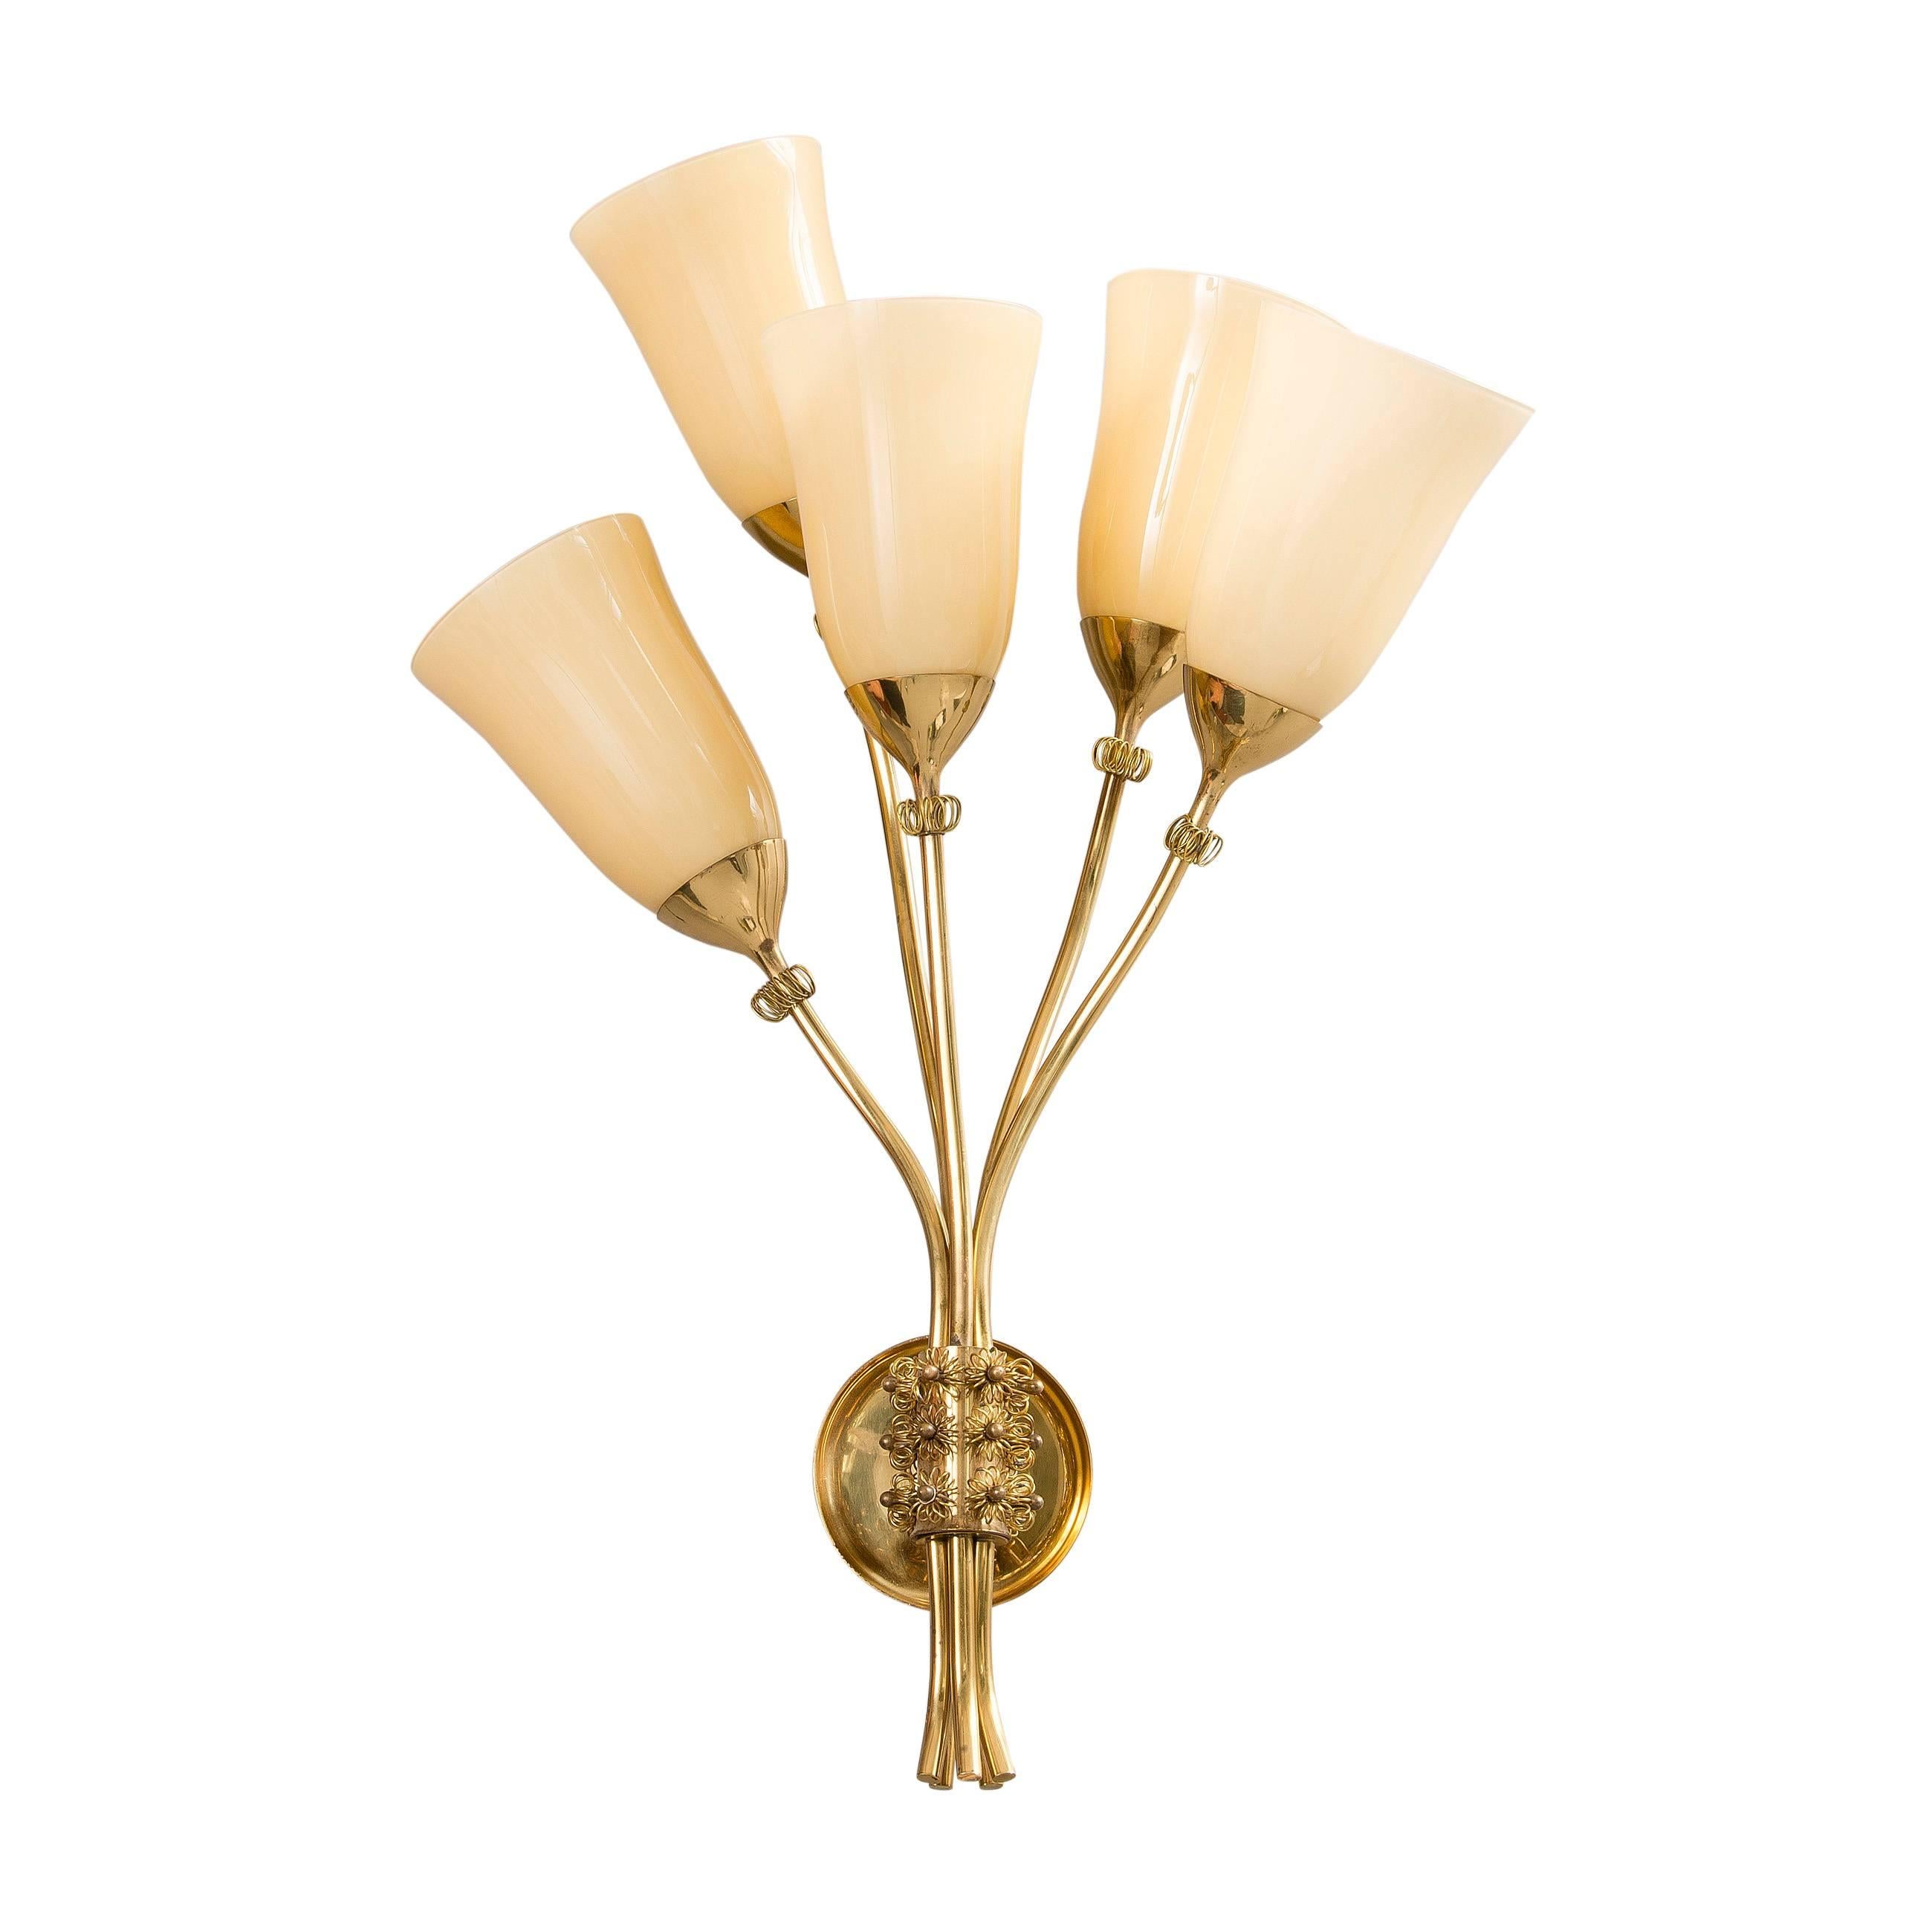 Scandinavian Modern Paavo Tynell Large Wall Light in Brass and Glass for Taito Oy, 1940s